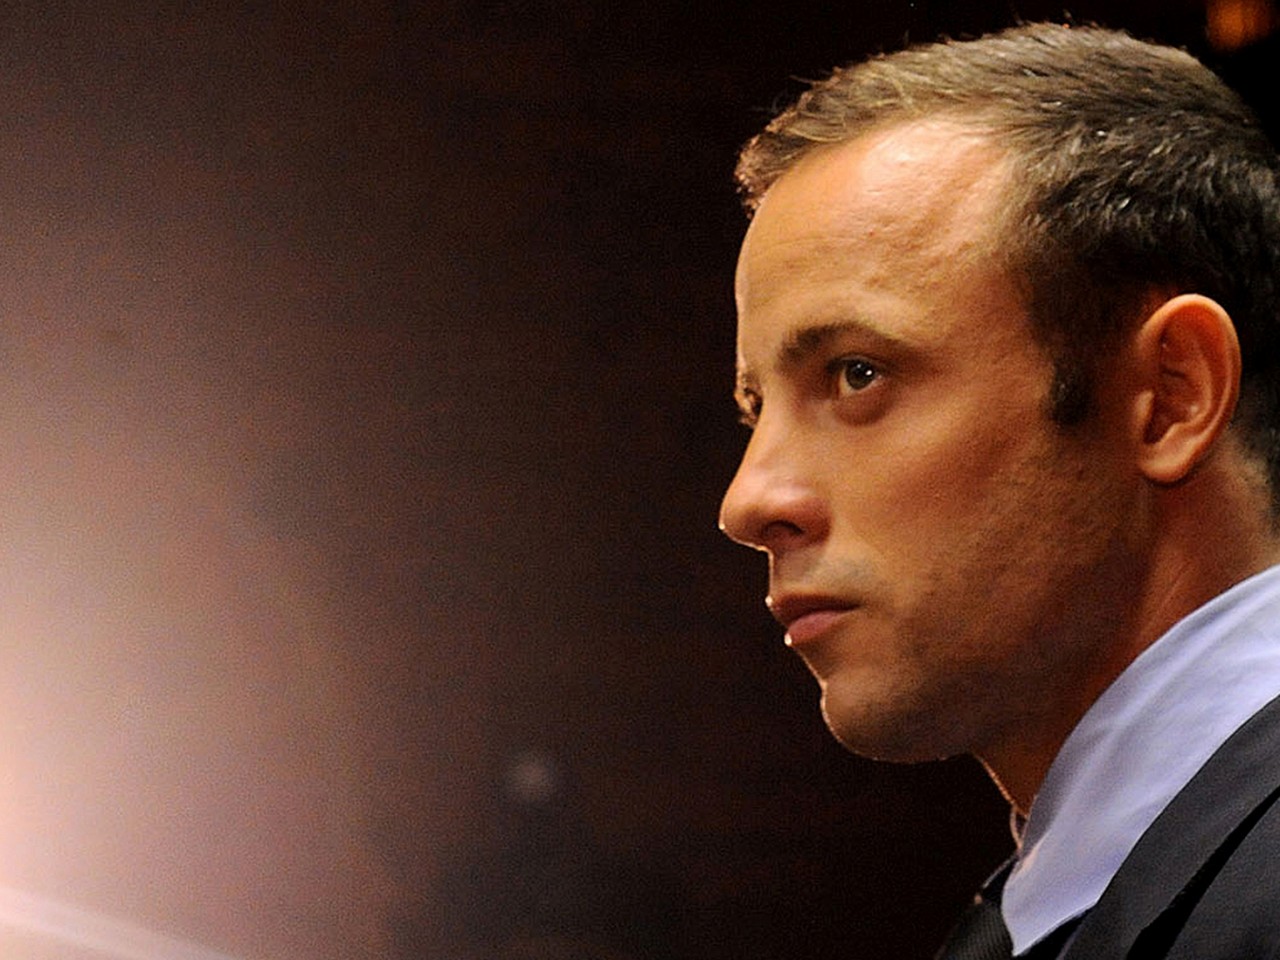 The guilty verdict of culpable homicide come after Oscar Pistorius was found not guilty of murder and cleared of premeditated murder.